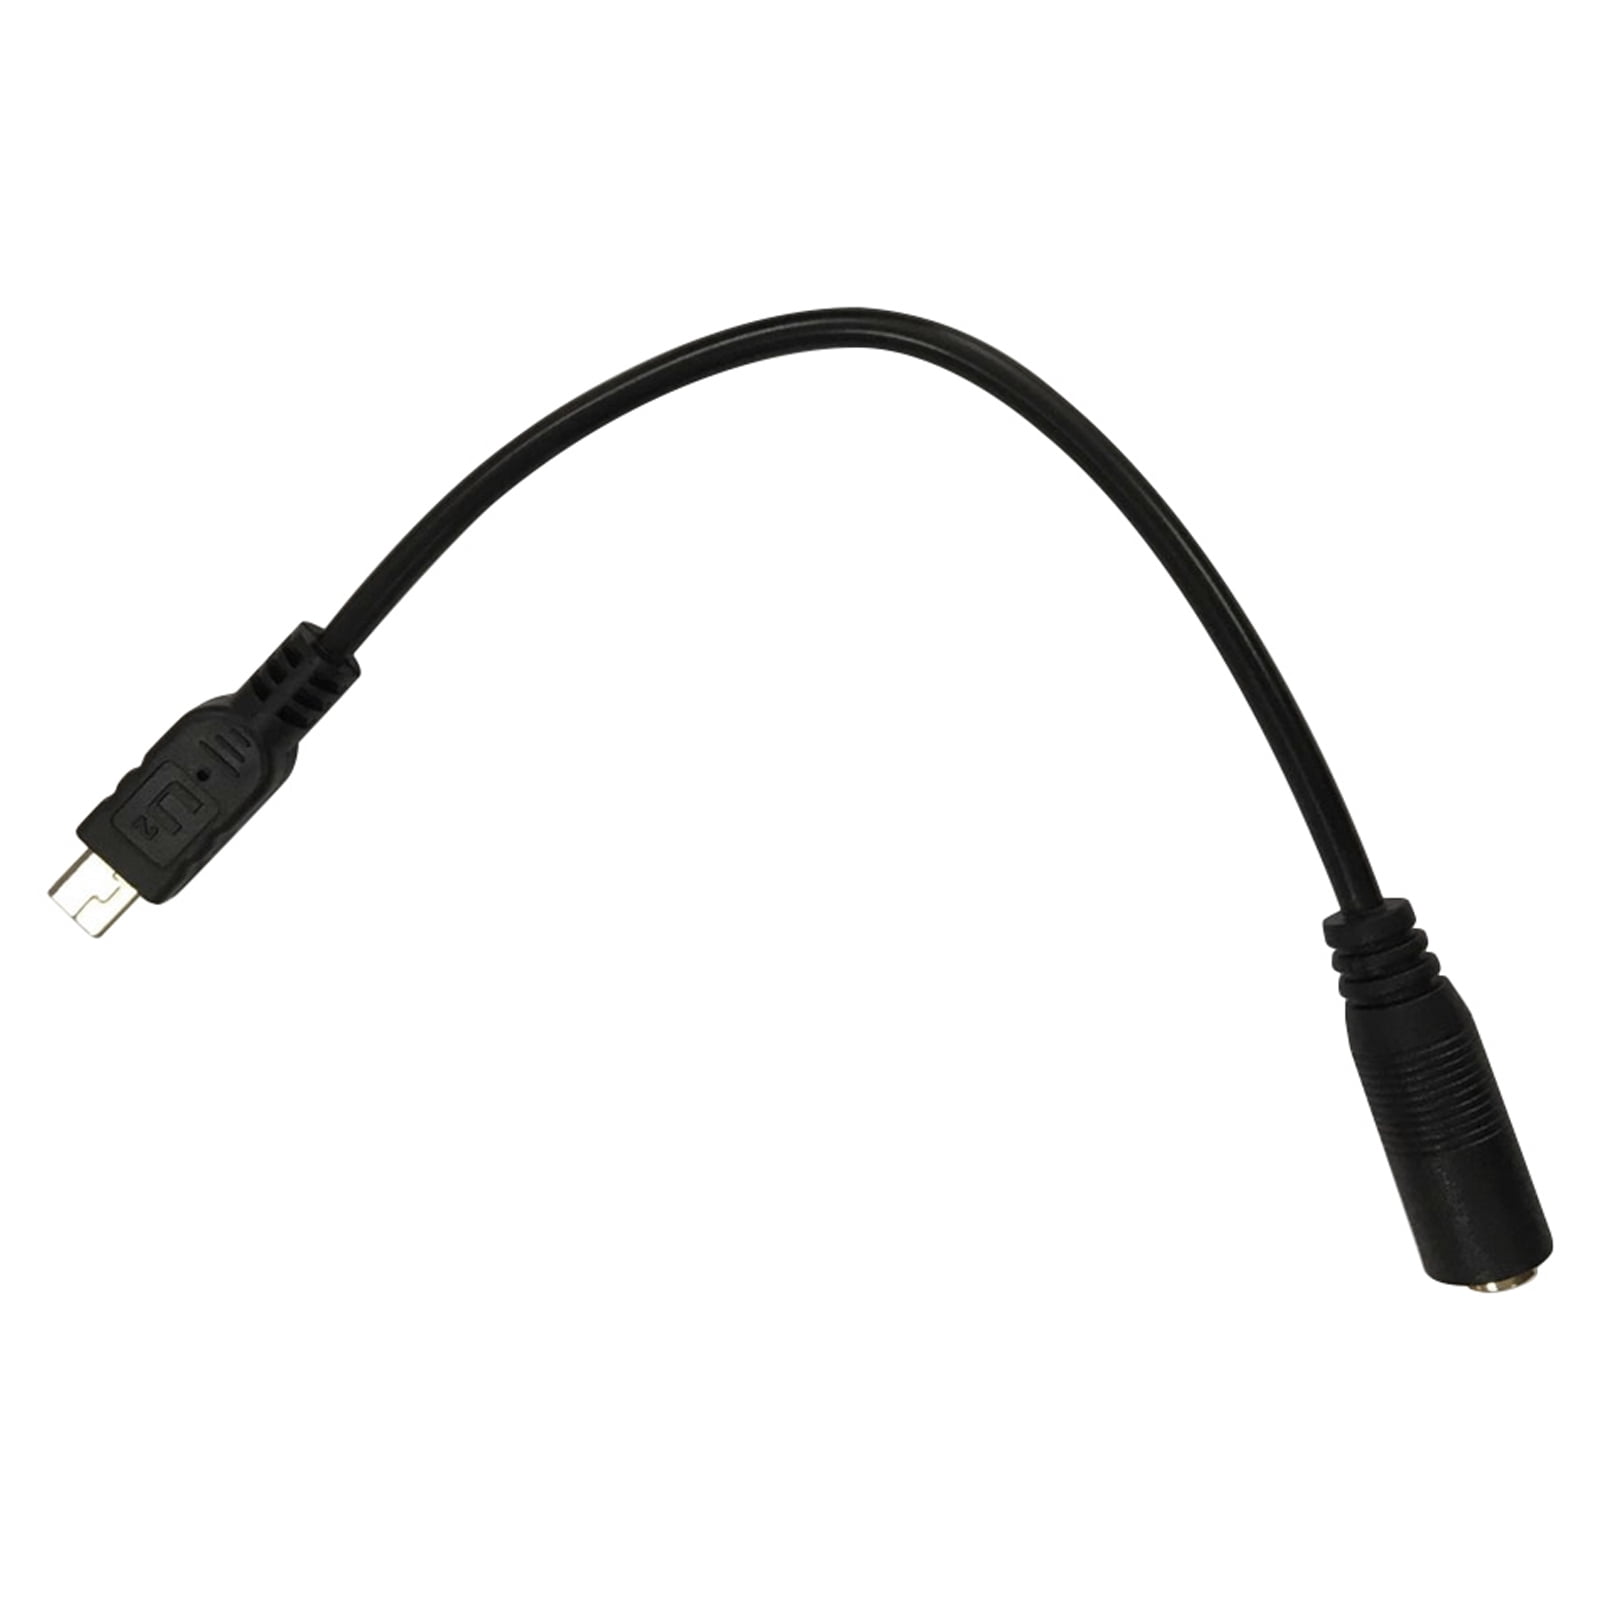 Cable 1,2 3pack 12" 12in 1ft short black 2725 Mini USB For Camera Gopro 3 4 